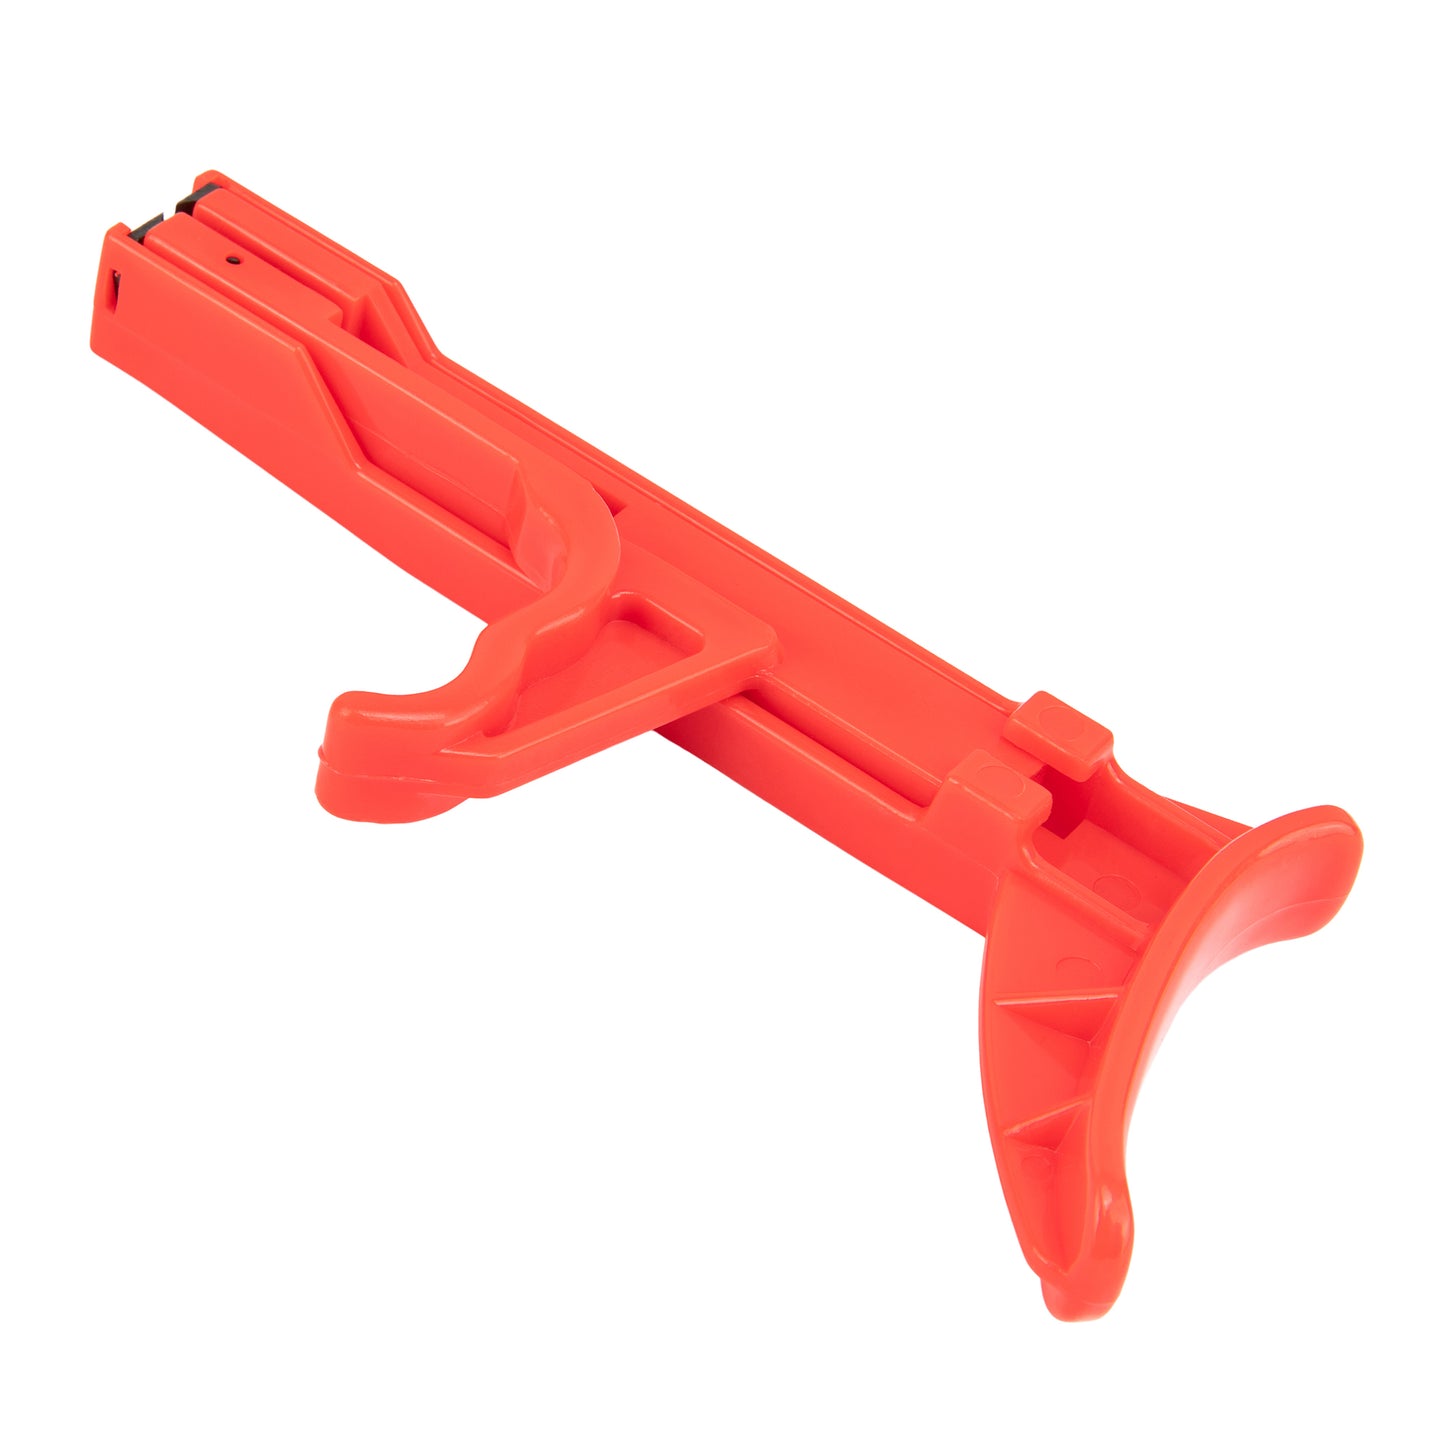 Cable Tie Gun - Red